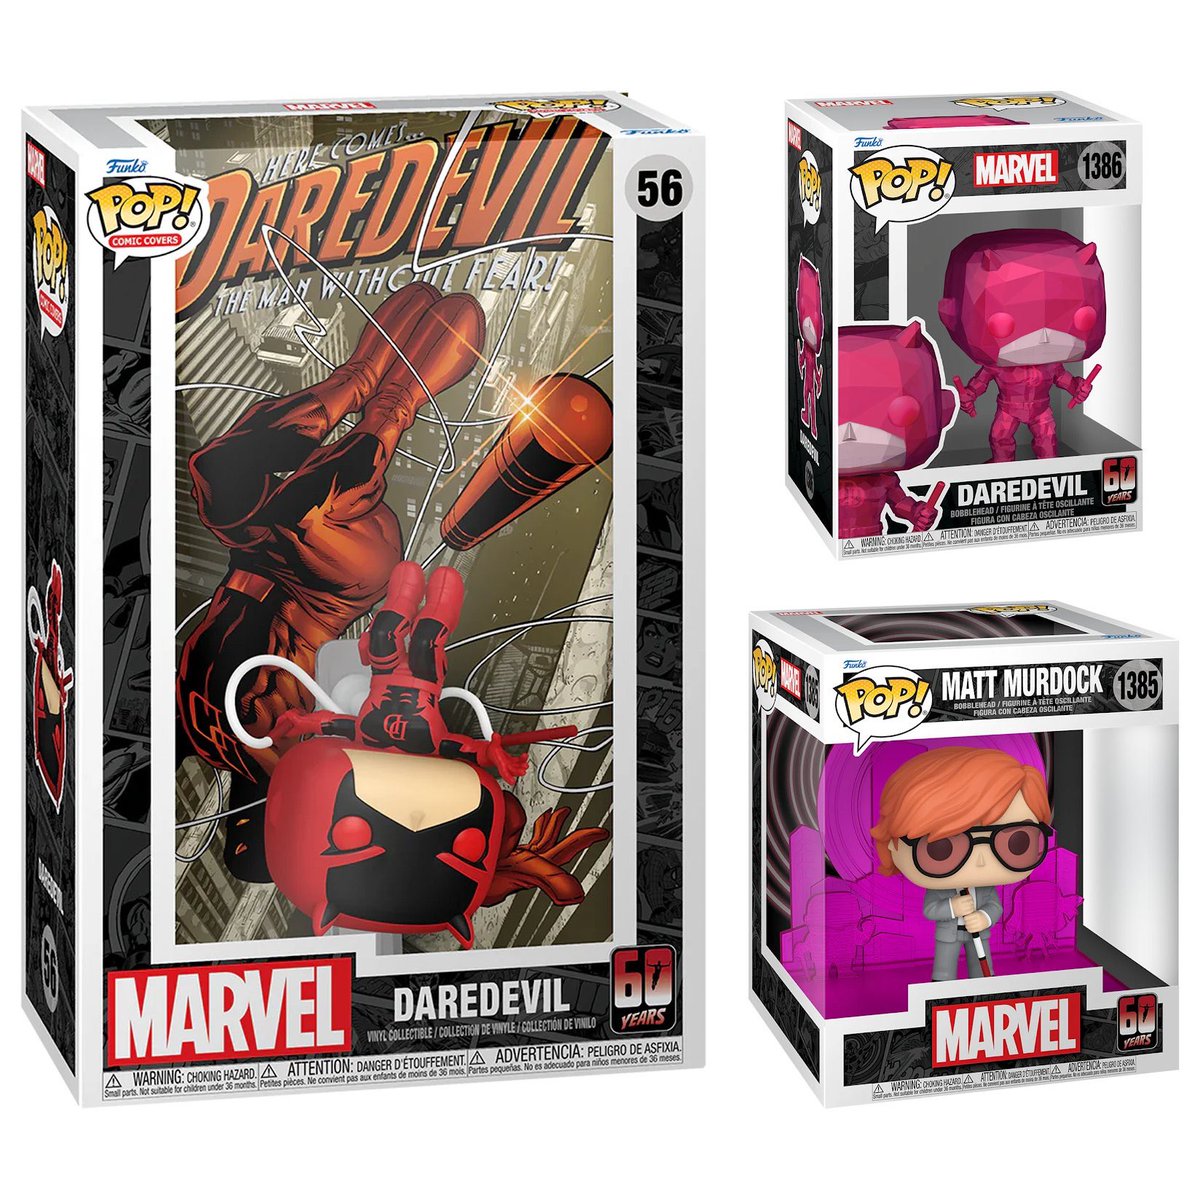 Preorder Now: Funko Pop! Daredevil 60th Anniversary 📦 Amazon: amzn.to/3wBrMw2 🌍 Ent Earth: ee.toys/NLM5VS * No Charge Until it Ships #Ad #Funko #FunkoPop #FunkoPops #FunkoPopVinyl #Pop #PopVinyl #FunkoCollector #Collectible #Collectibles #Toy #Toys